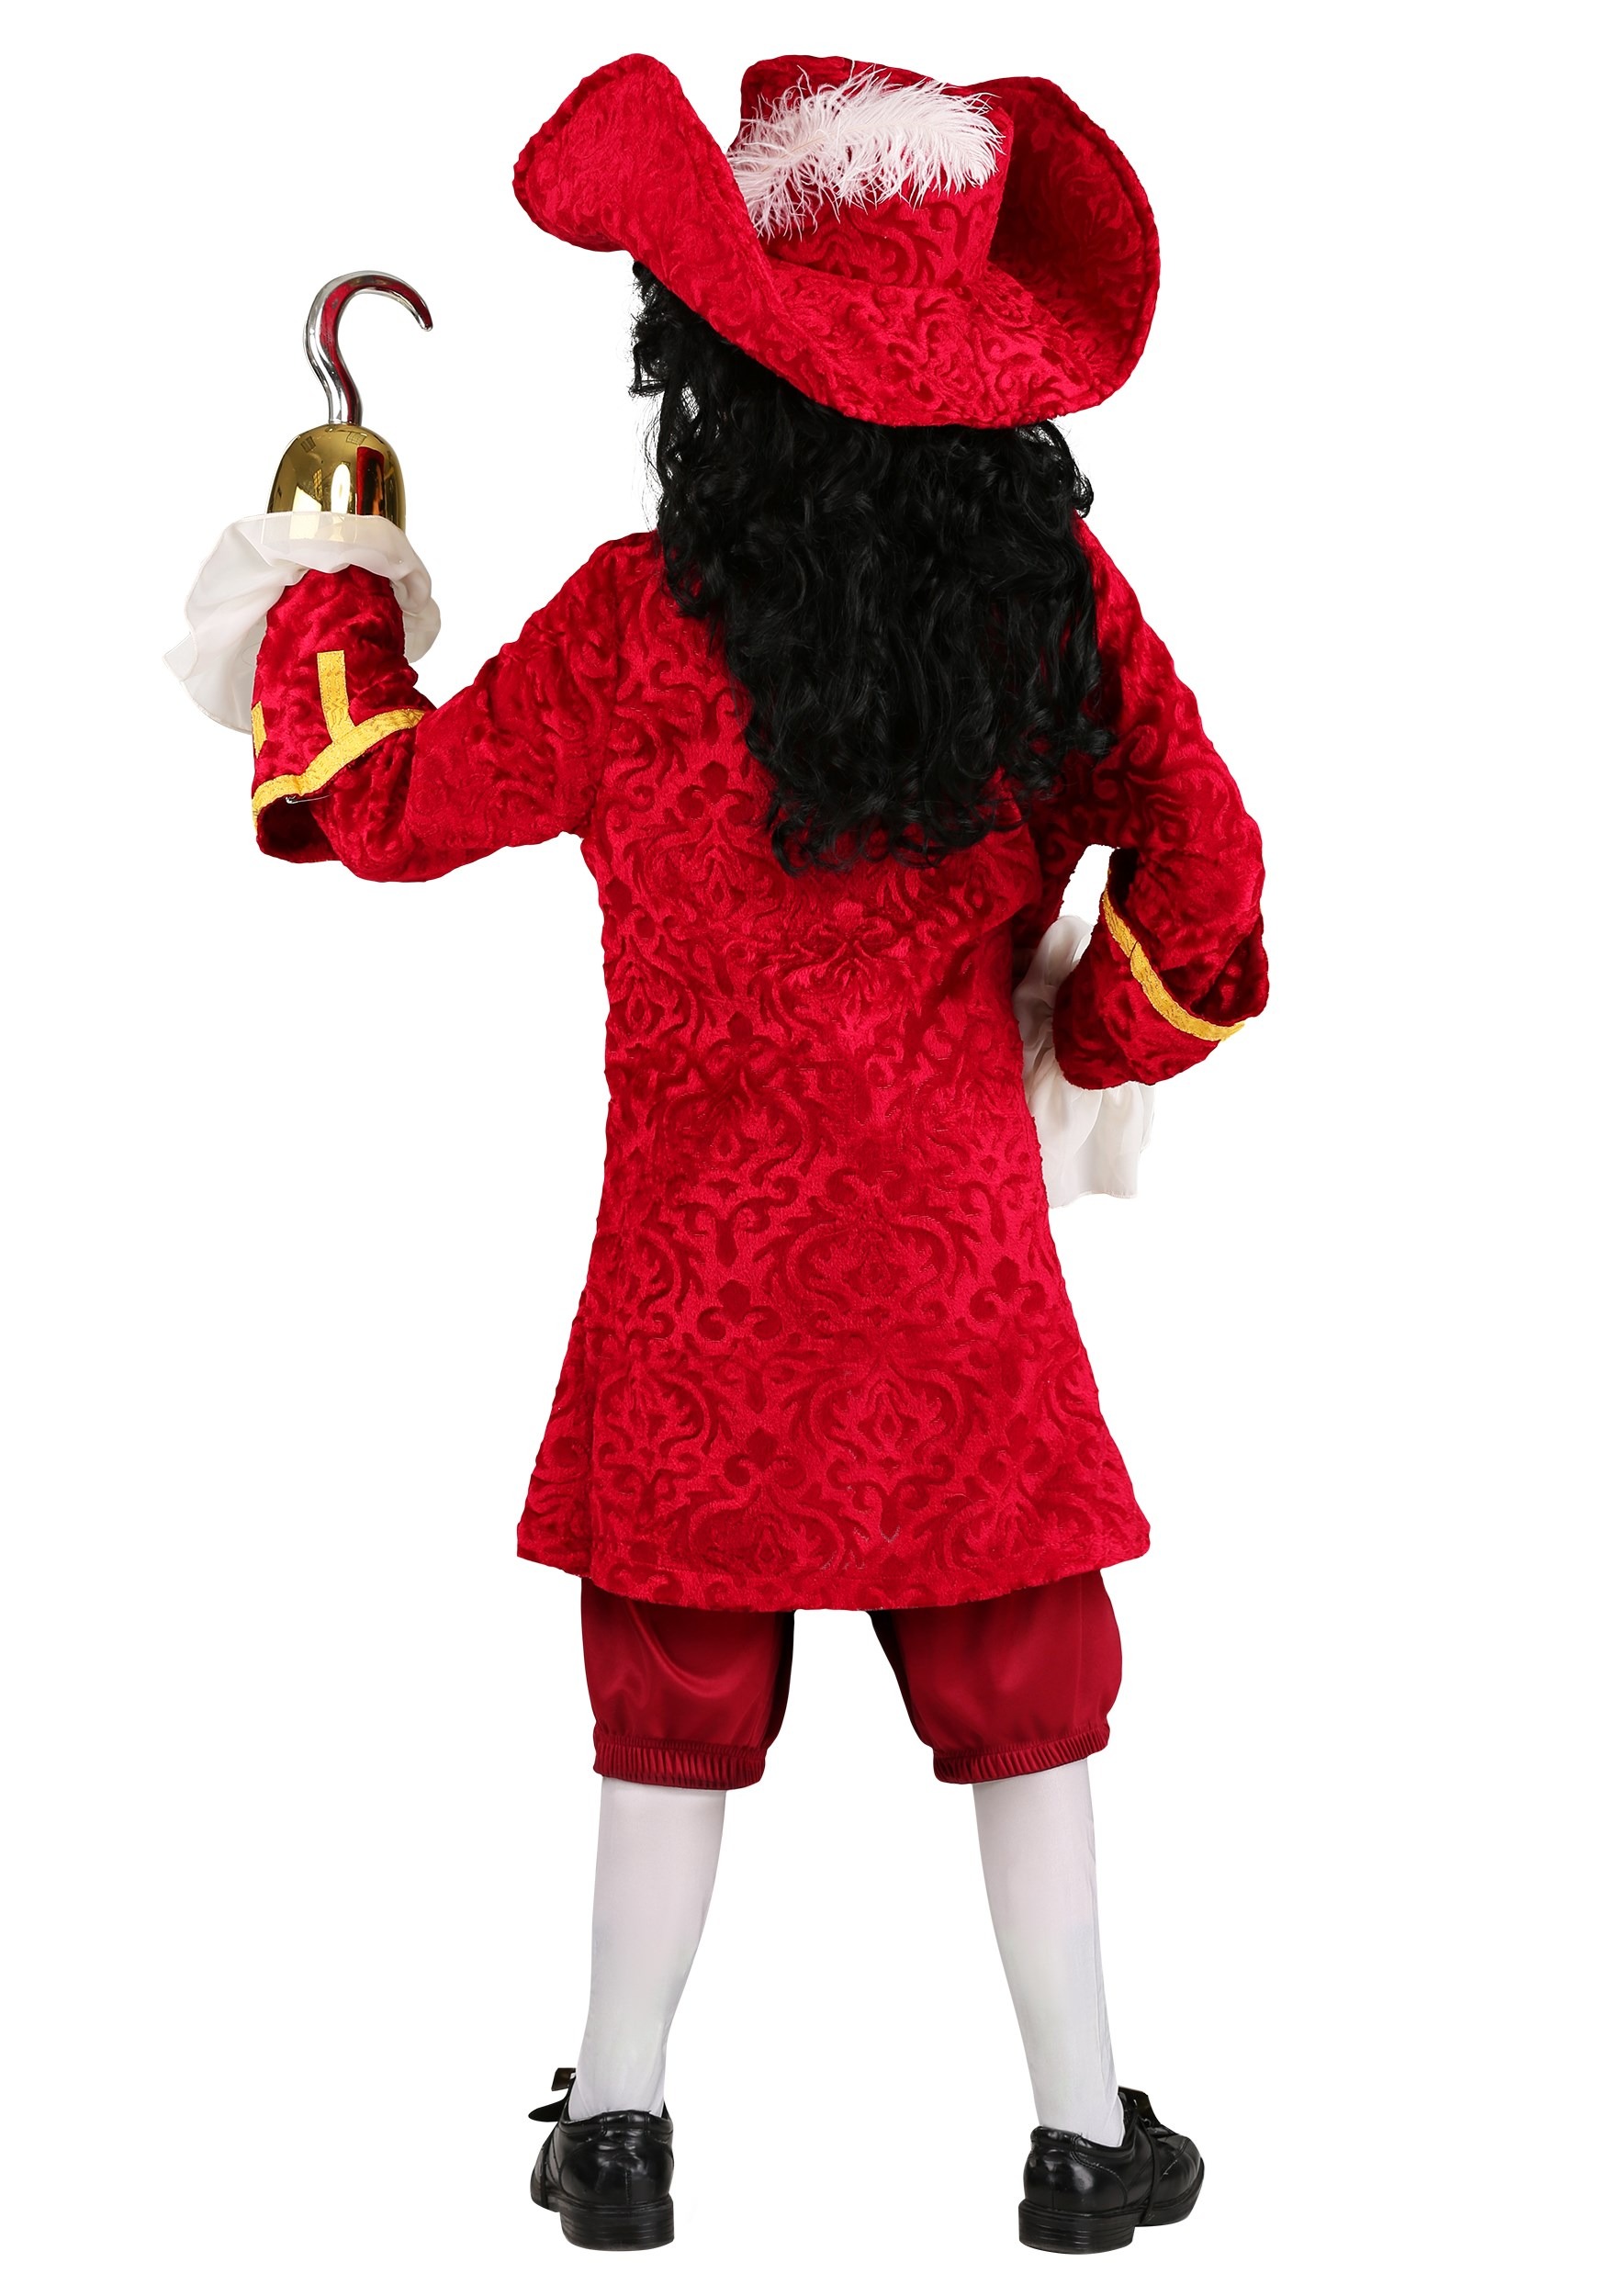 https://images.fun.com/products/63780/2-1-147569/-kids-captain-hook-deluxe-costume-.jpg